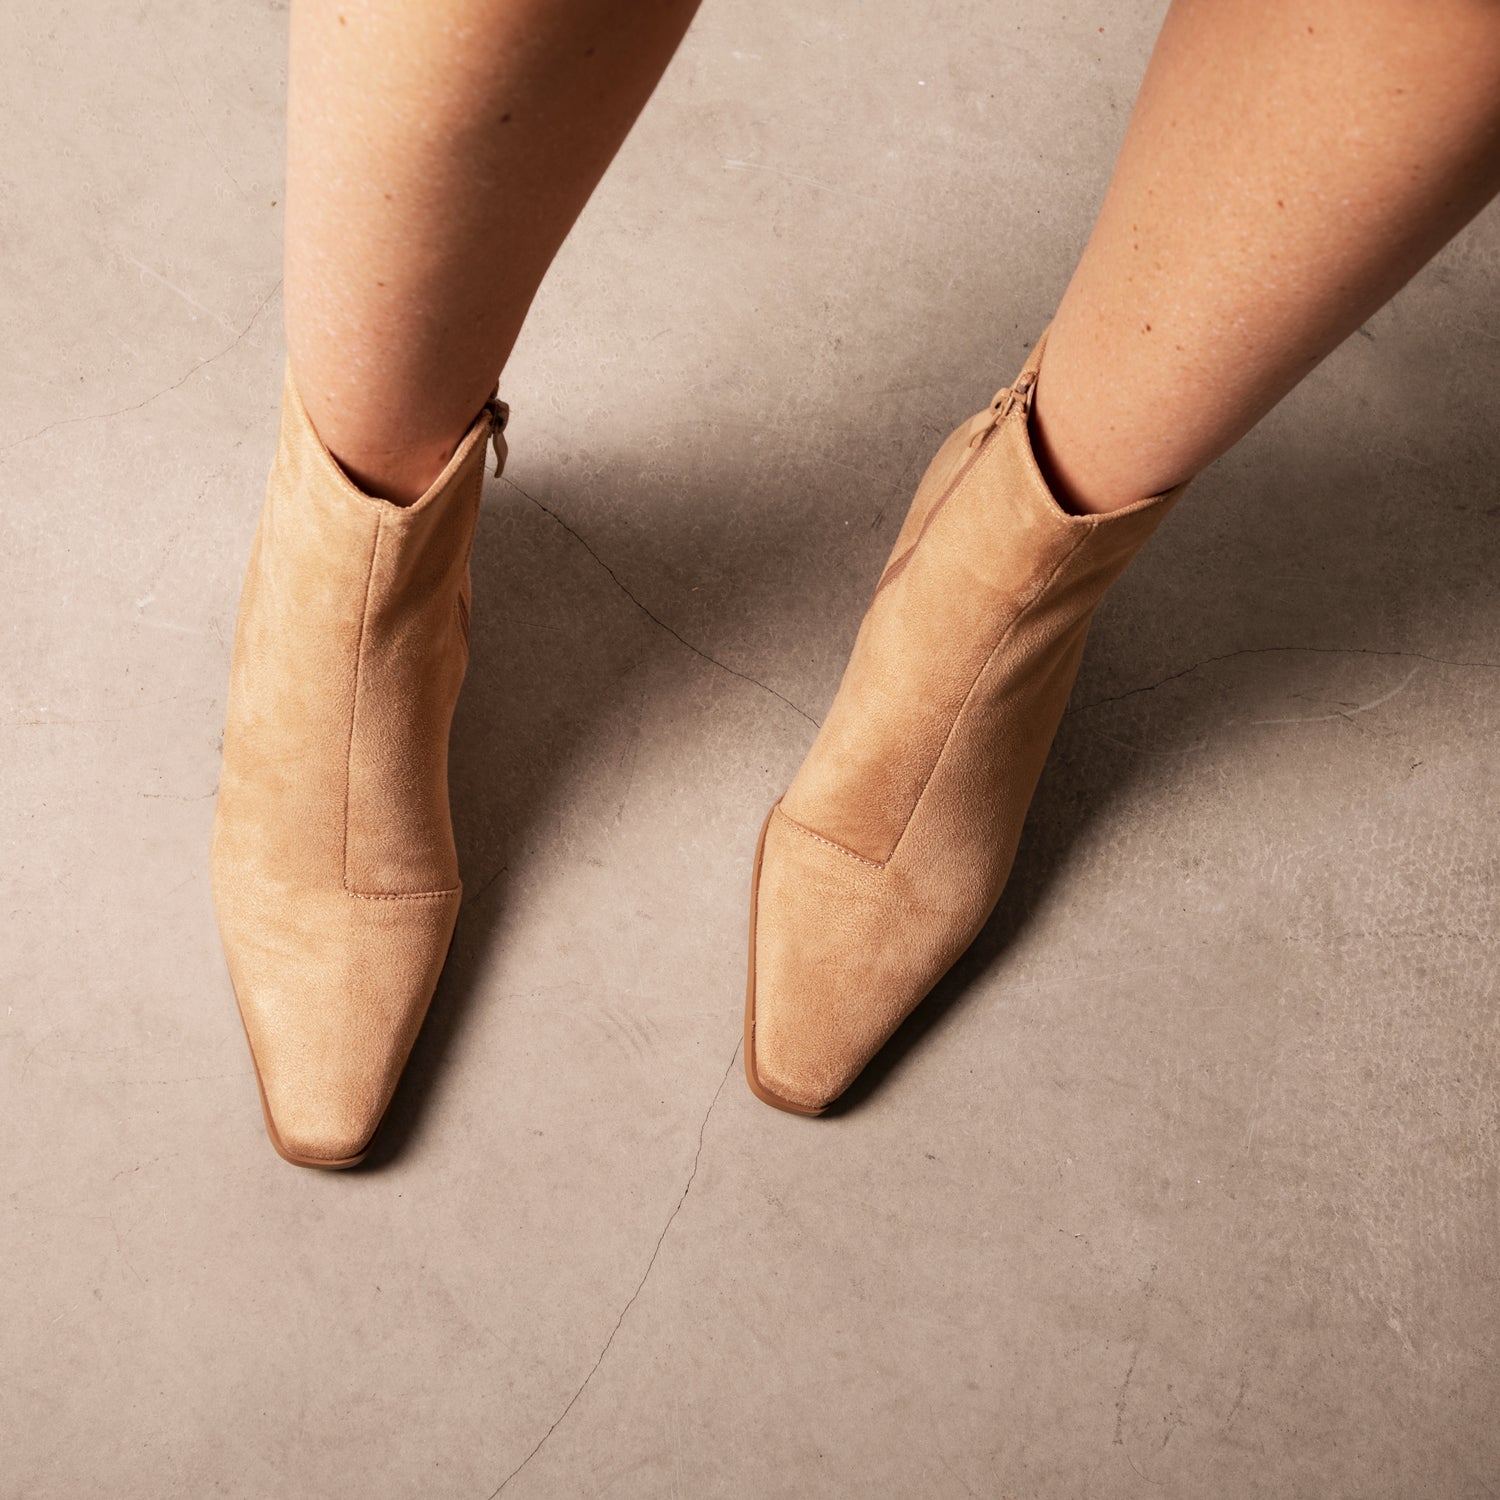 RAID Mollie Suede Ankle Boot in Nude